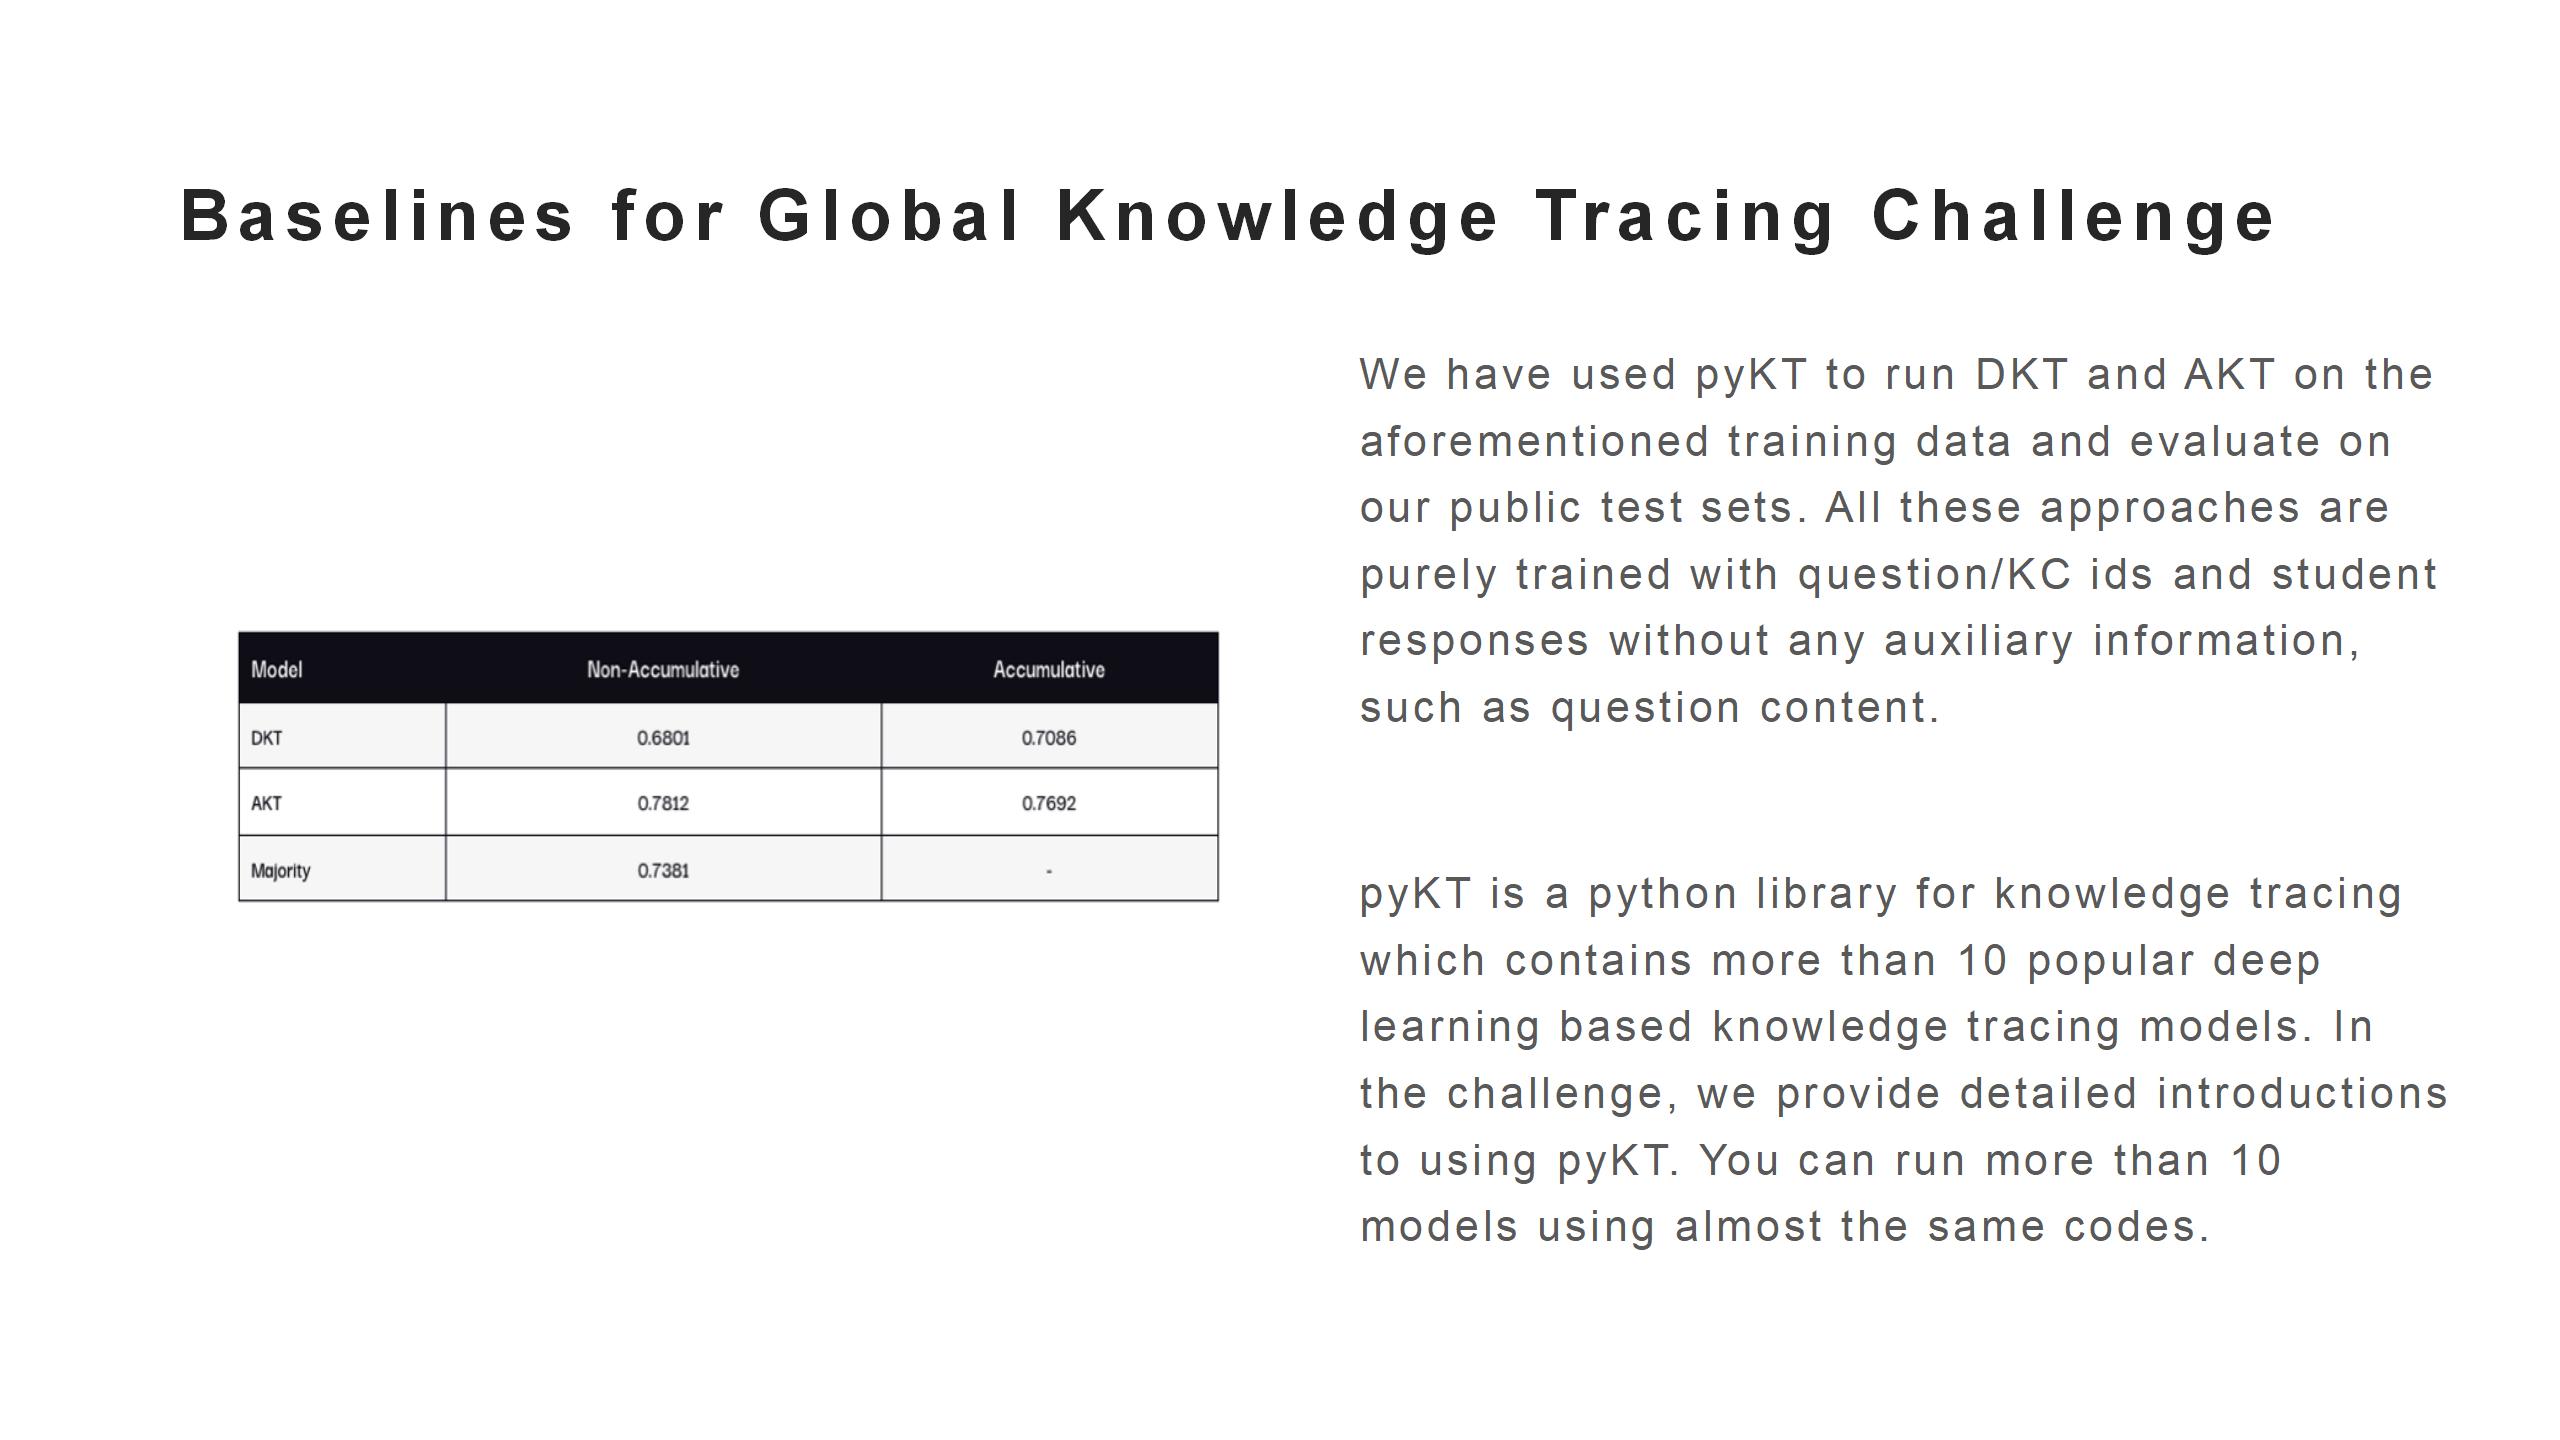 Baselines for Global Knowledge Tracing Challenge